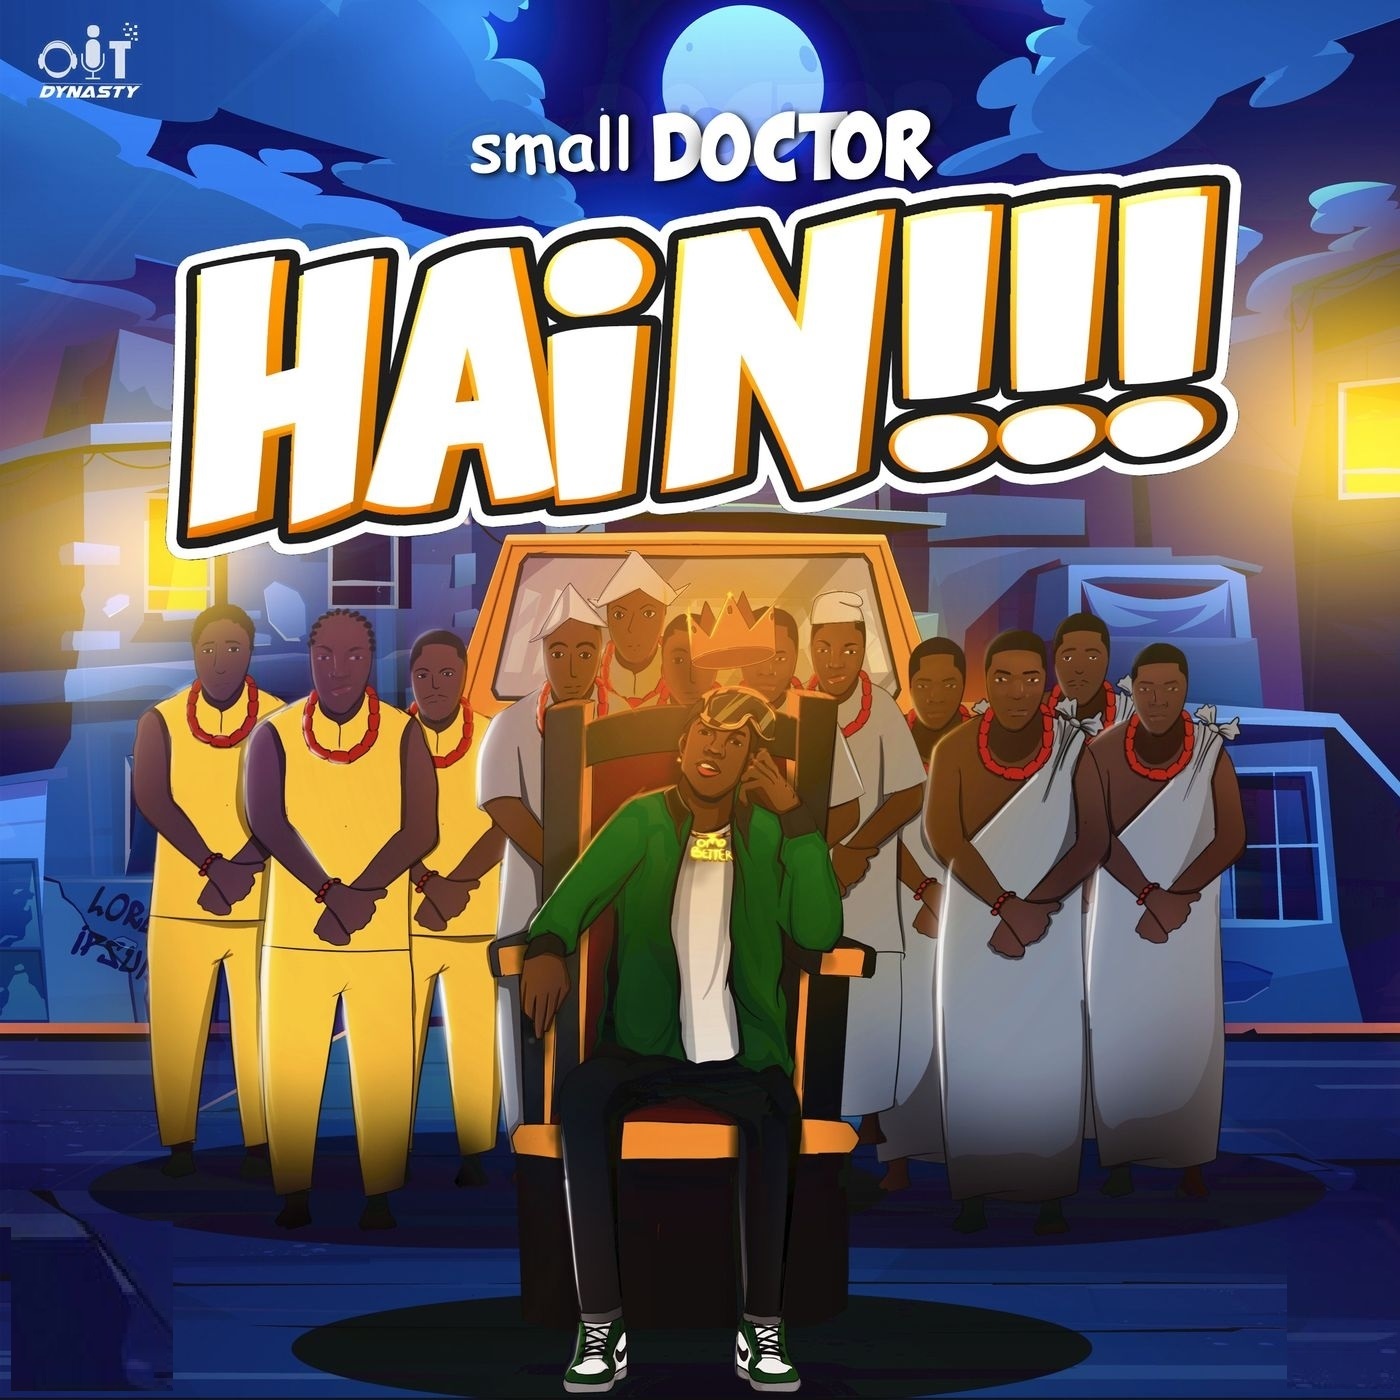 Small Doctor – Hain!!! Mp3